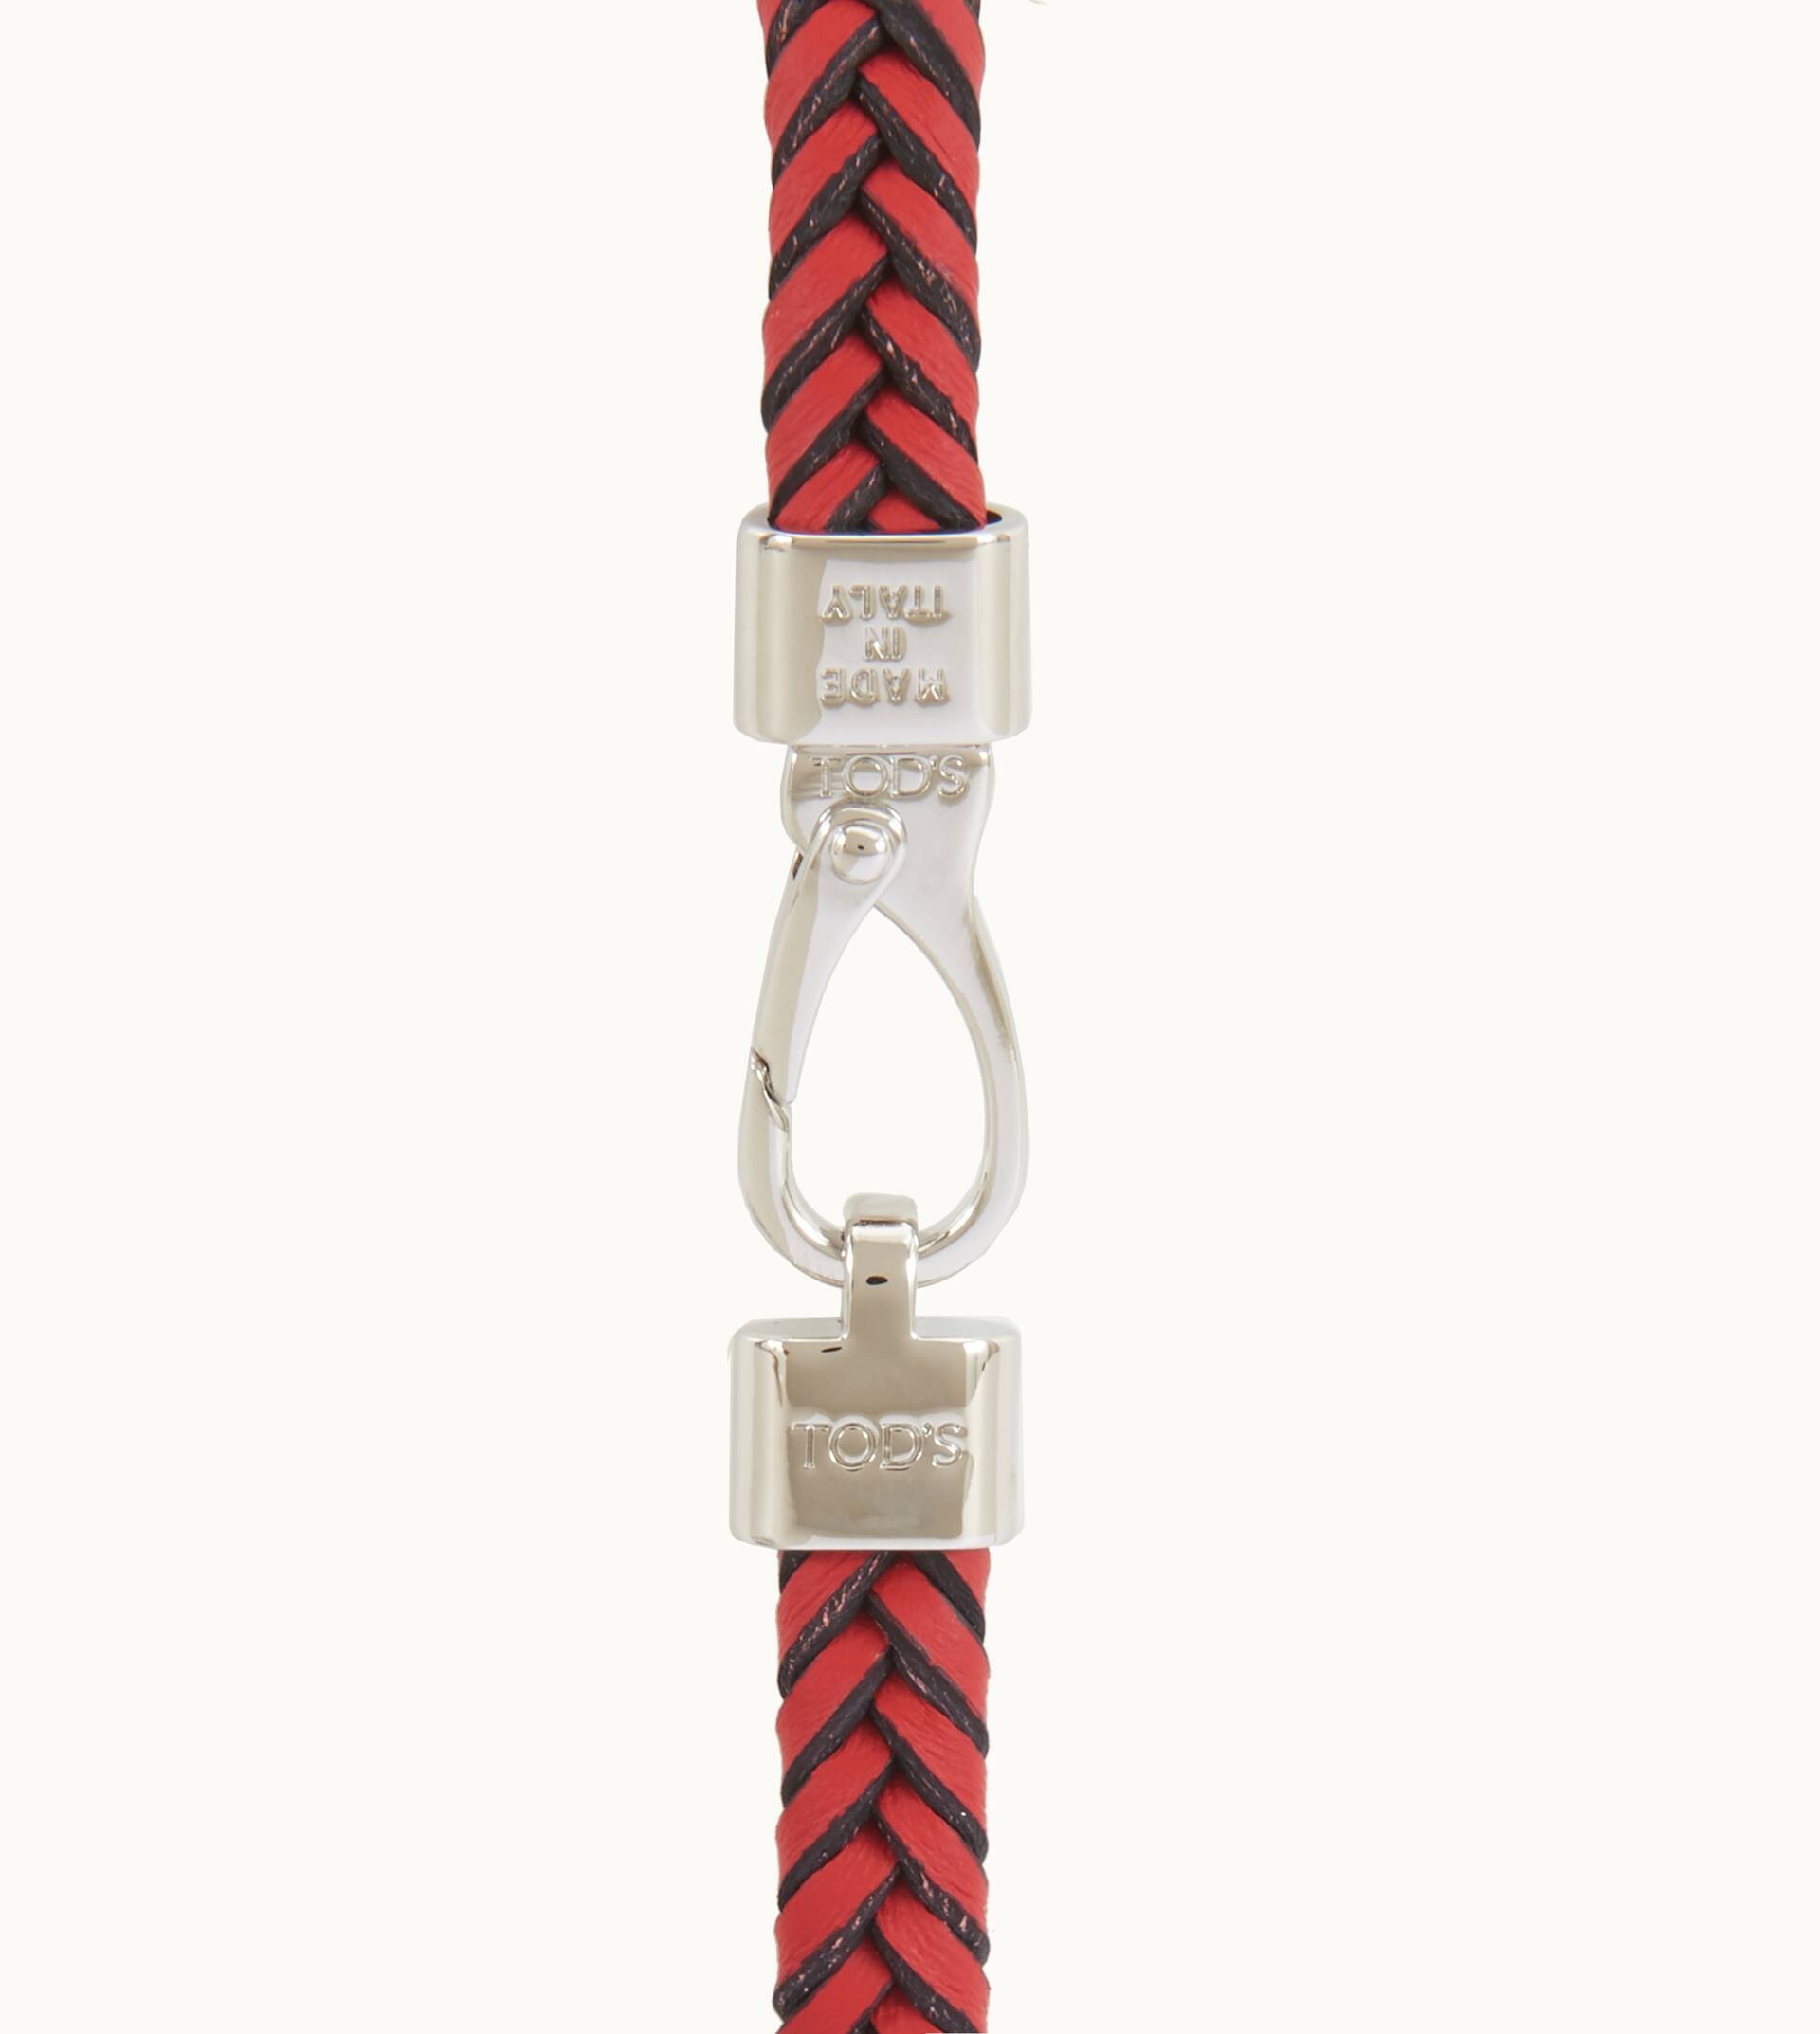 BRACELET IN LEATHER - RED - 2